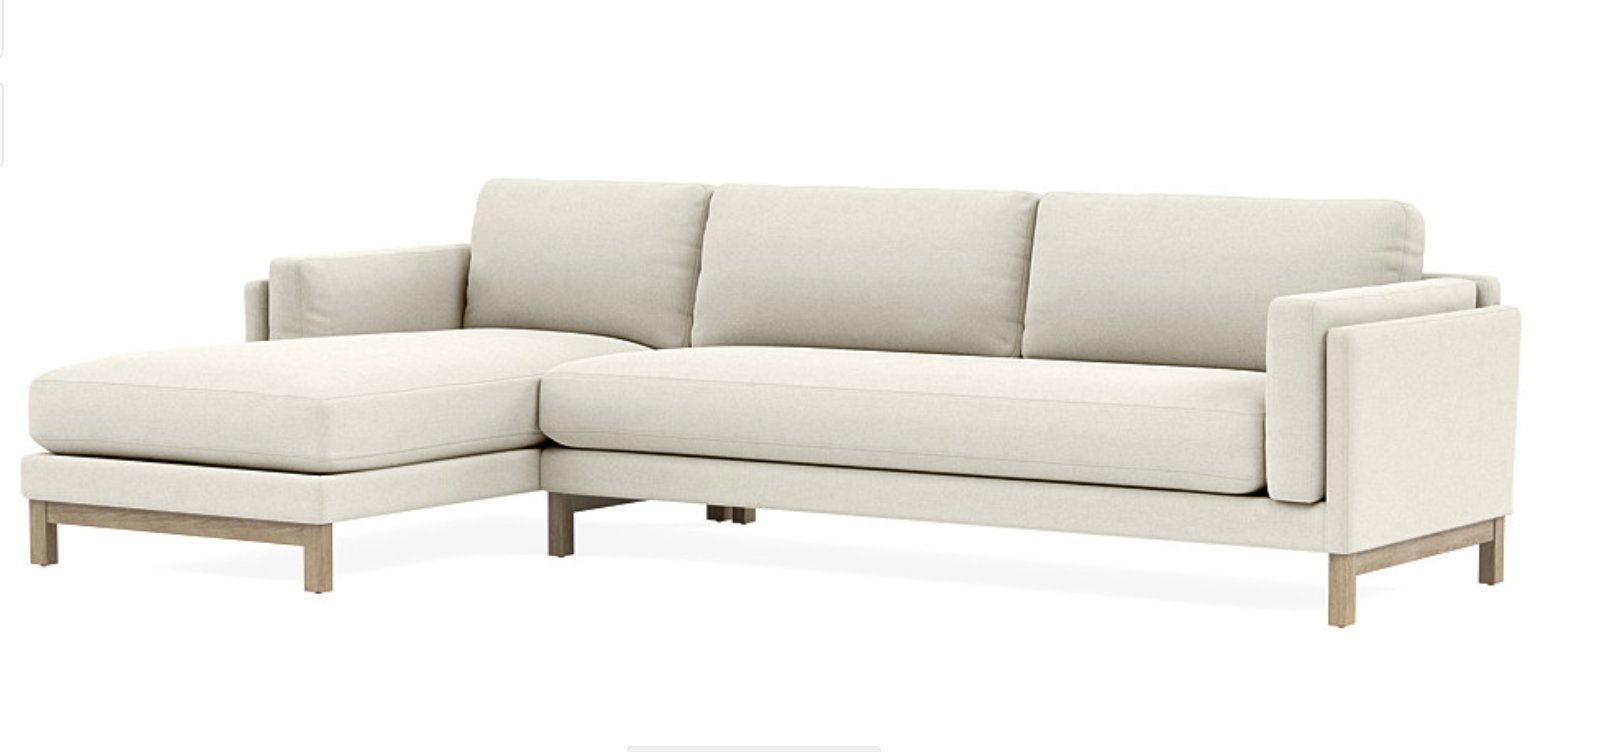 Gaby 3 piece Left Bumper Sectional with White Chalk Fabric, down alternative cushions, and White Wash Oak single rail legs - Image 0